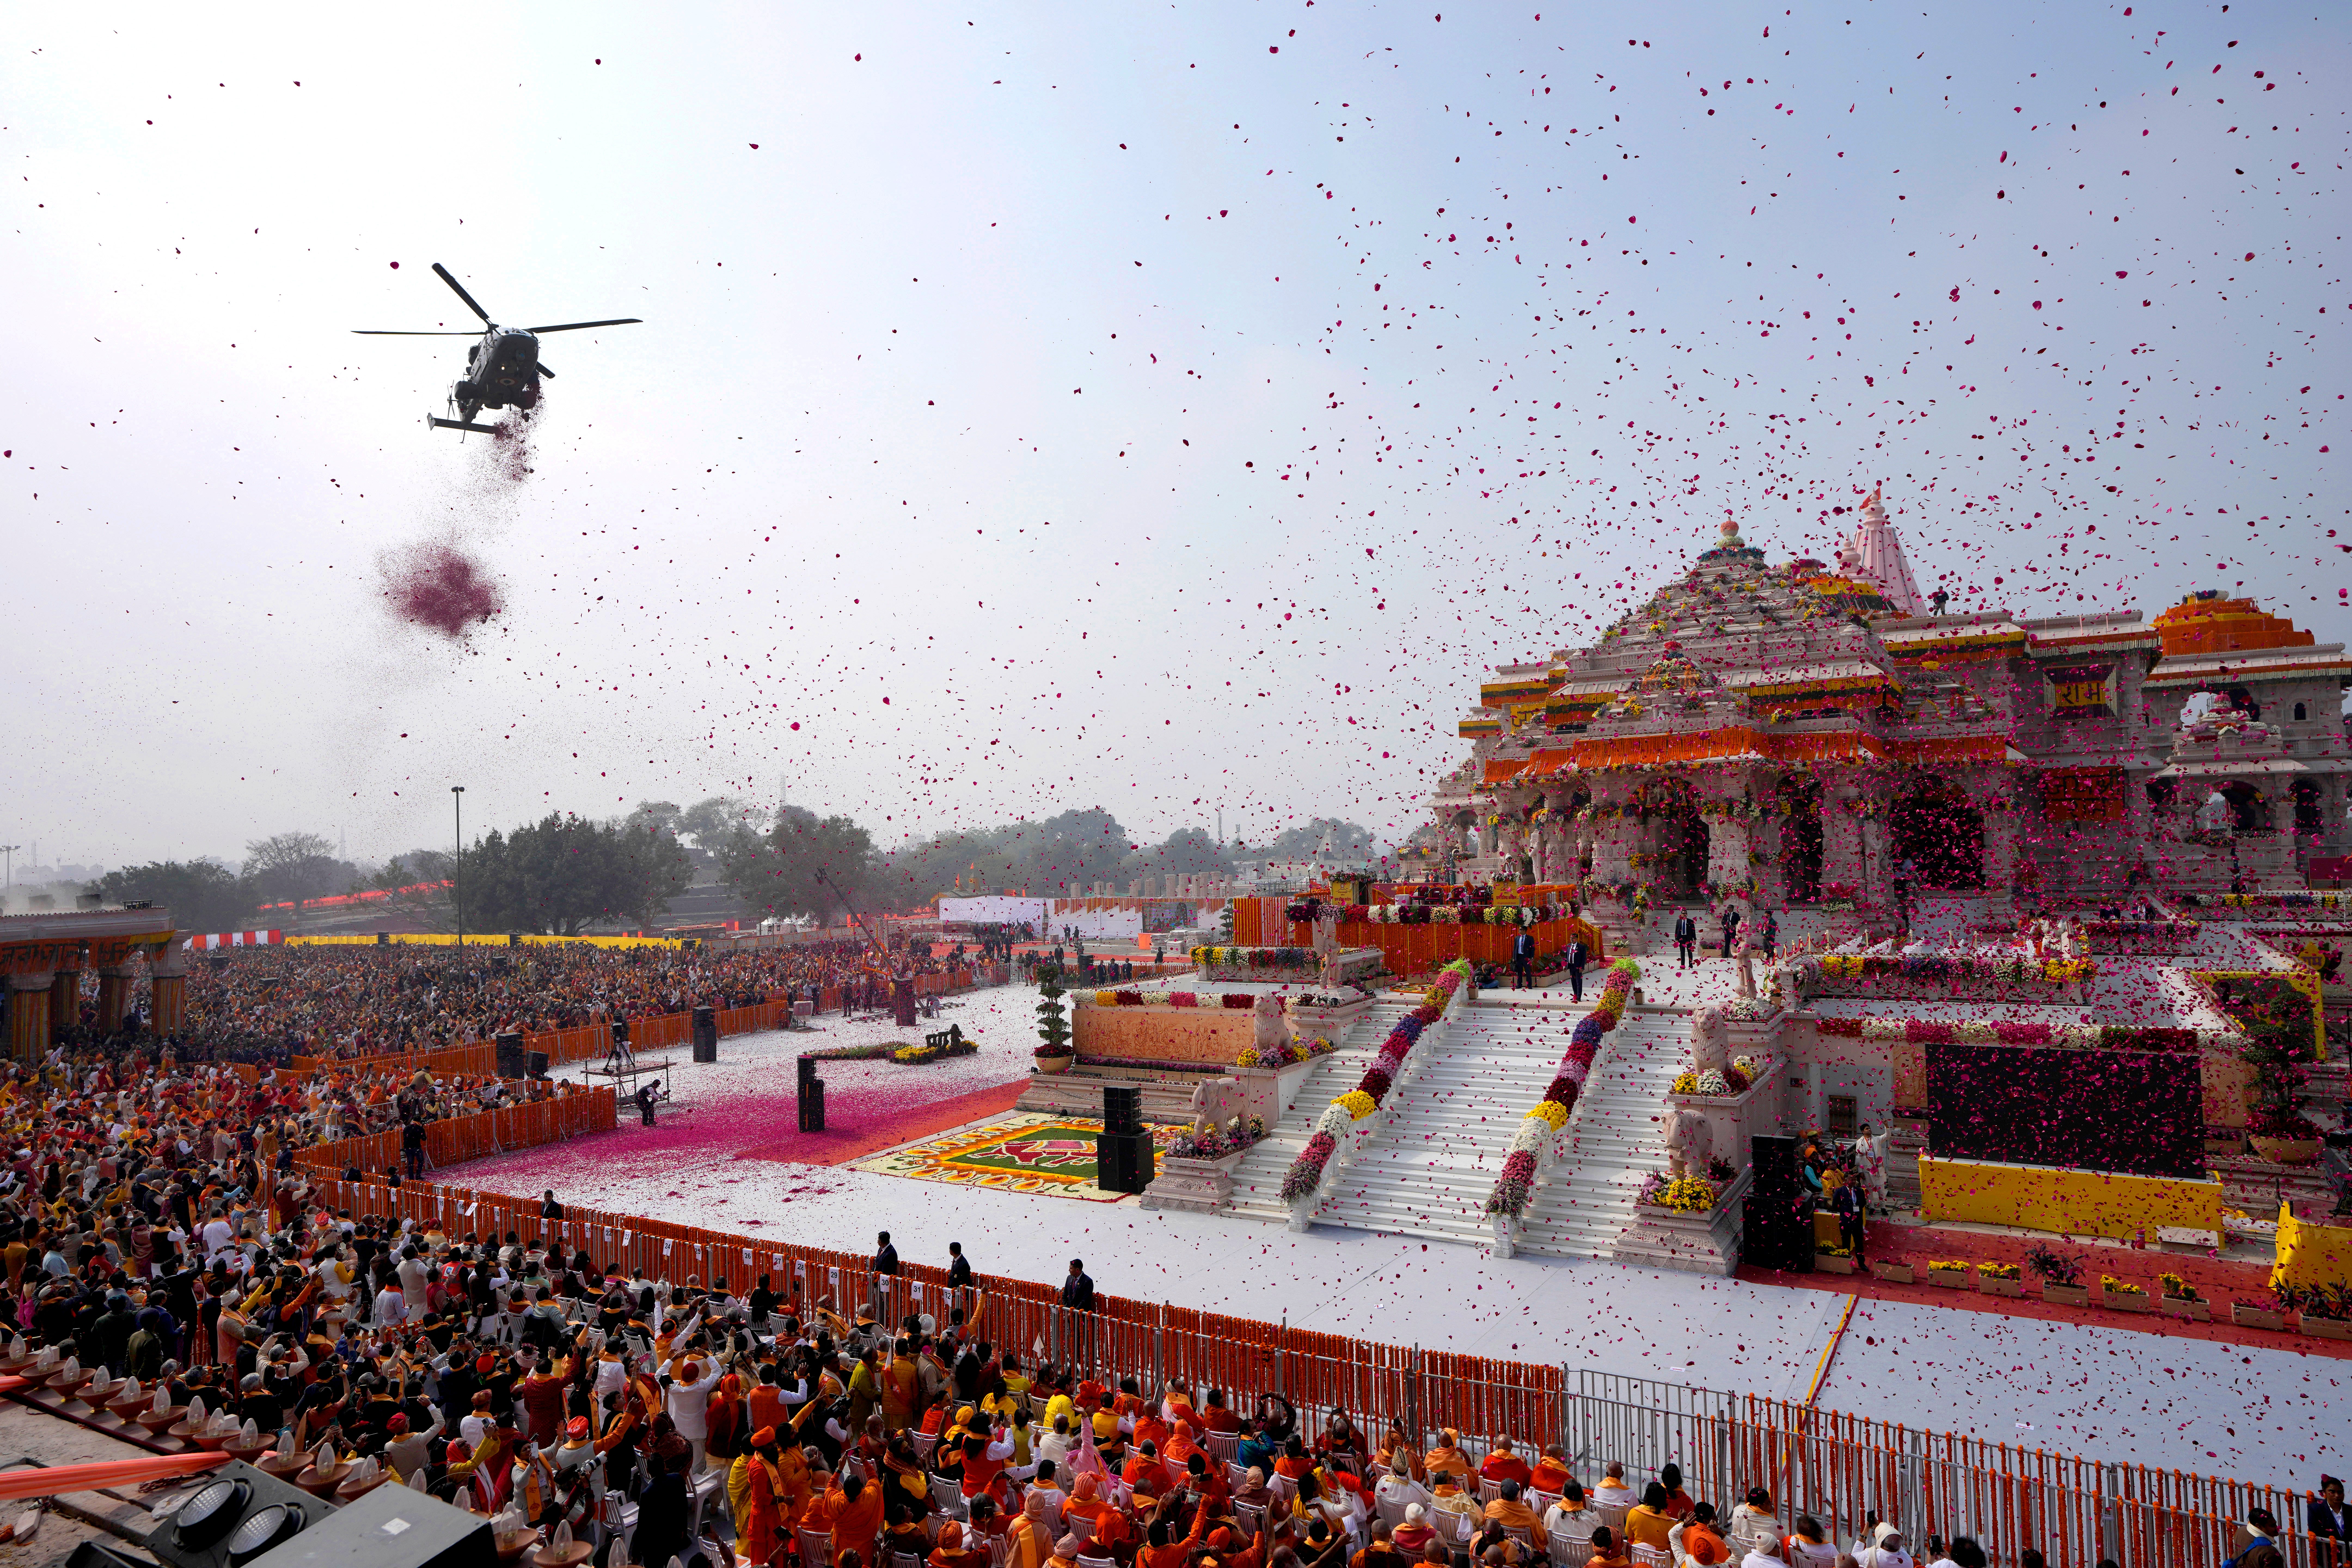 An Indian Air Force helicopter showers flower petals during the opening of Ram temple